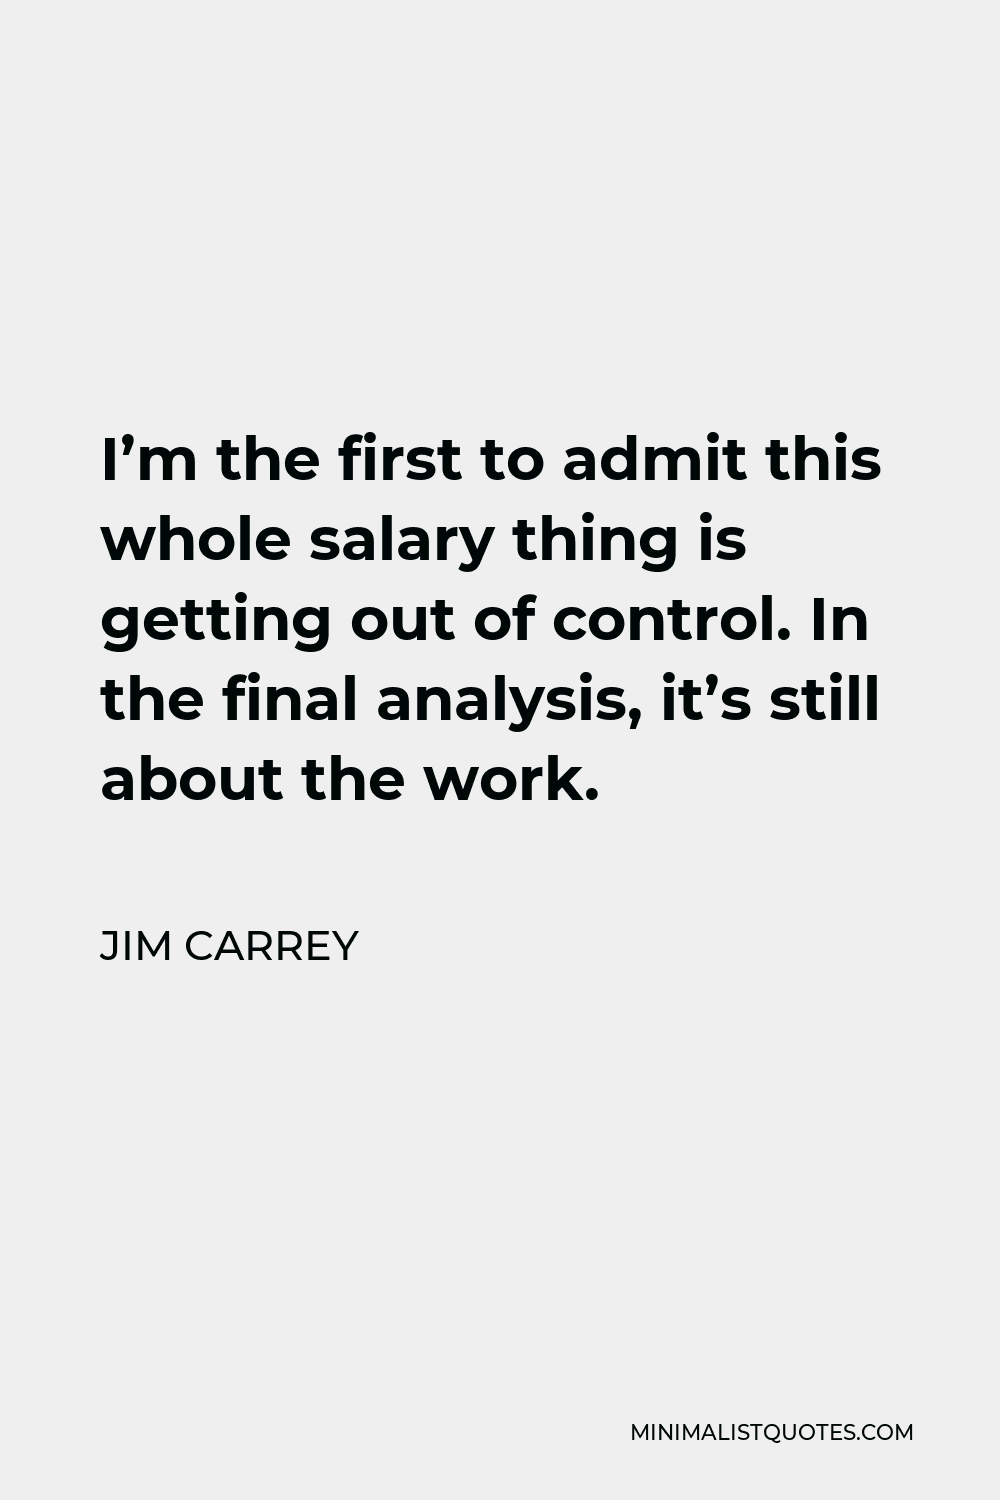 Jim Carrey Quote - I’m the first to admit this whole salary thing is getting out of control. In the final analysis, it’s still about the work.